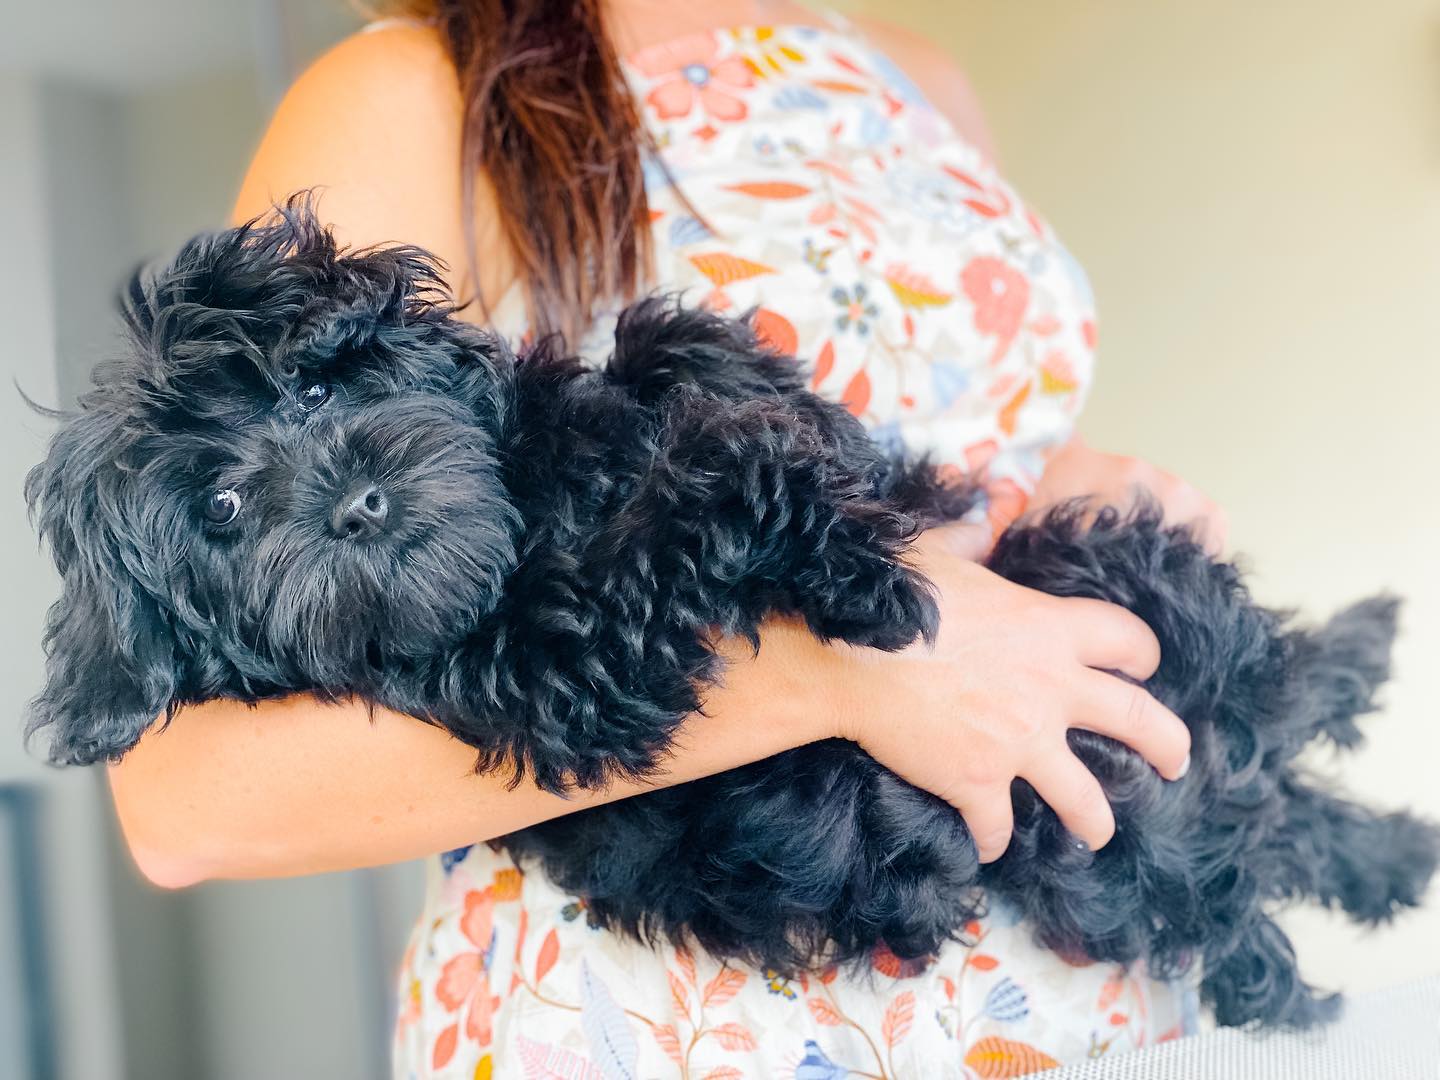 This will give you a glimpse of the black teddy bear goldendoodle being held by its owner. Their personality and temperament are amazing!